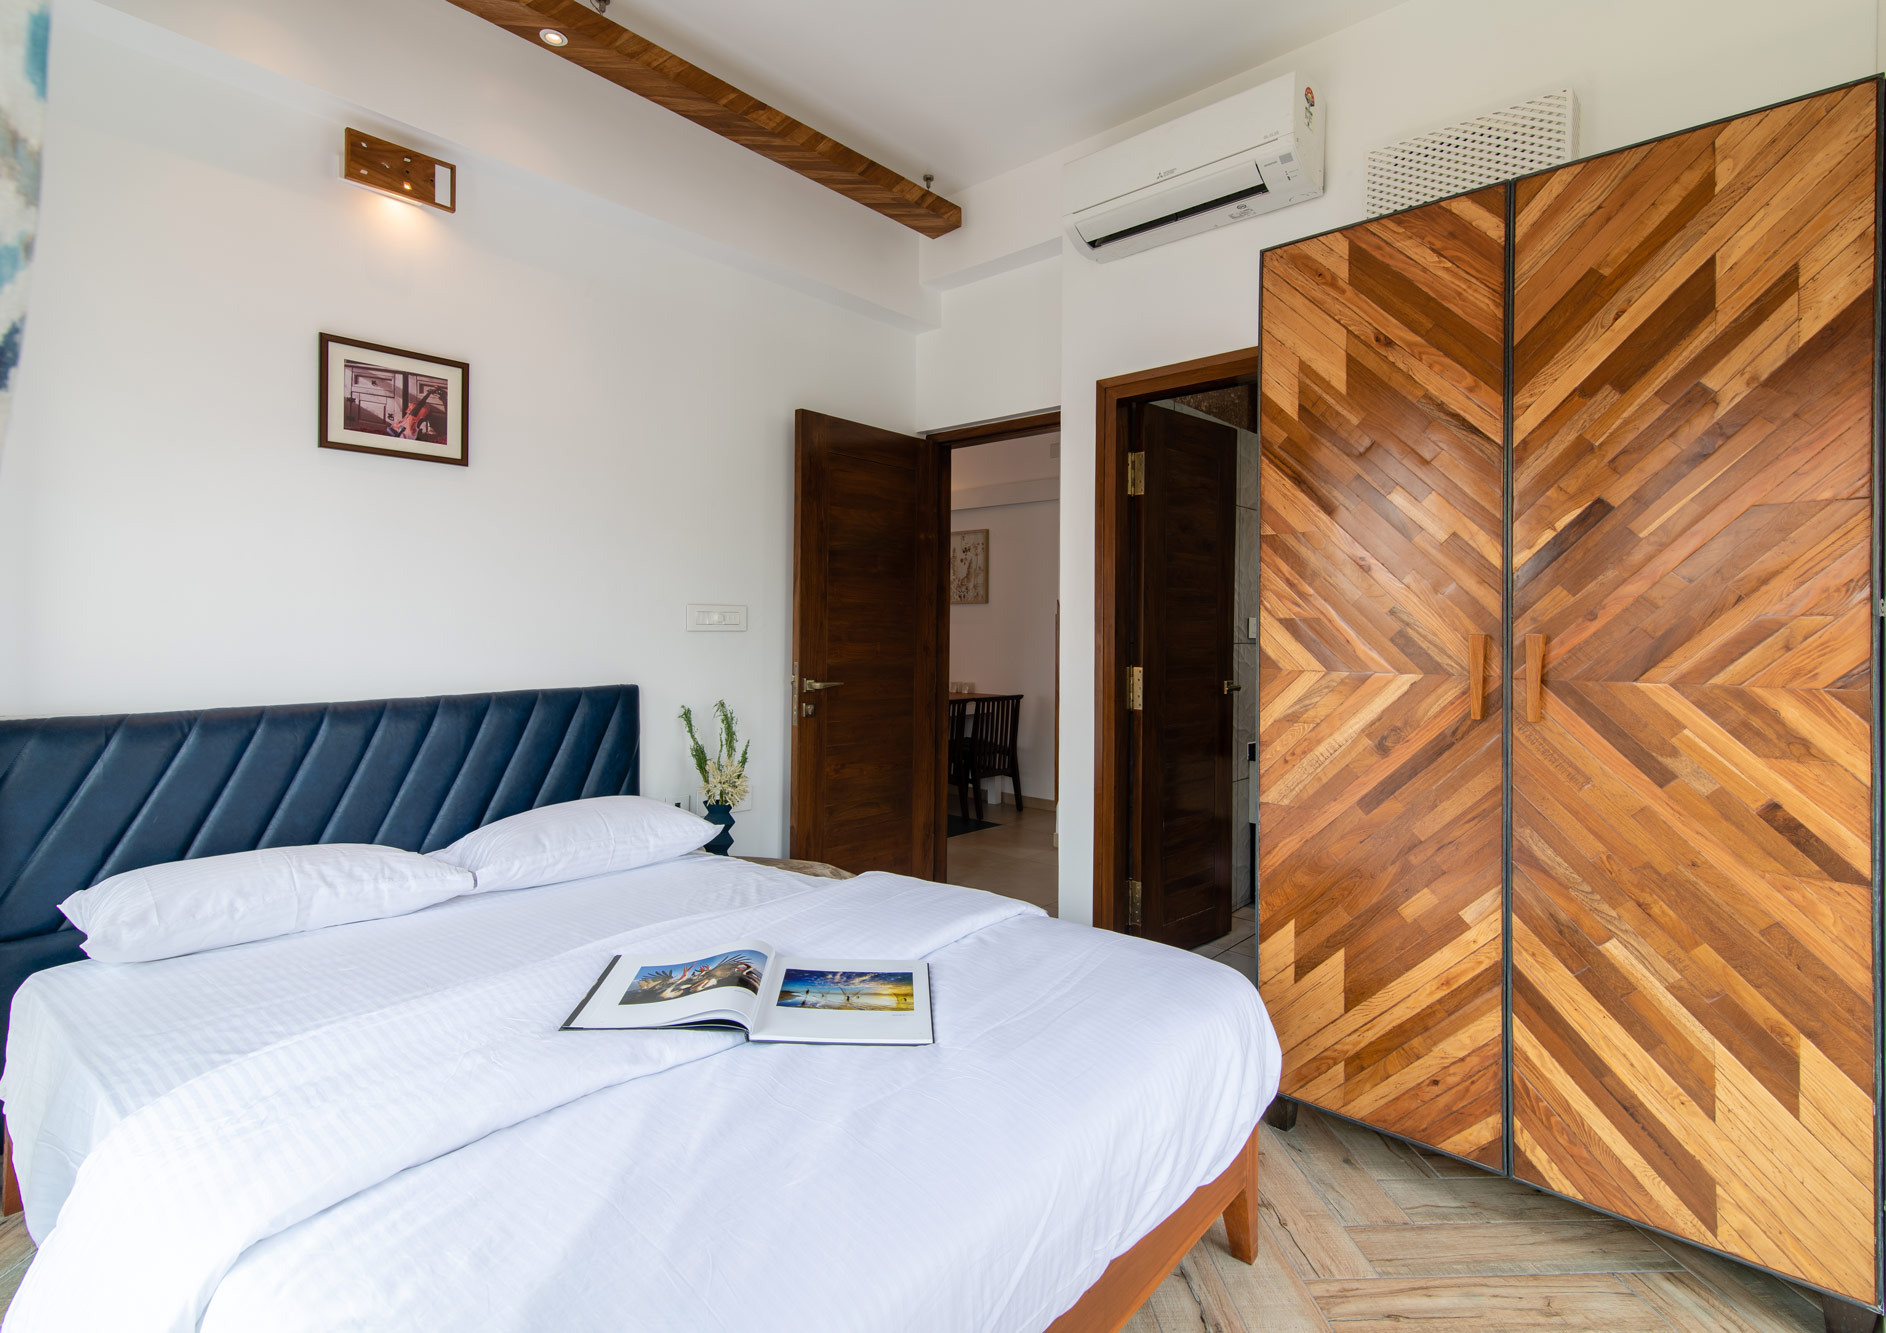 The Aspen Bedroom' wood themed interiors in the Wood Apartment at the Jazminn, luxury service apartments in Kalyan Nagar